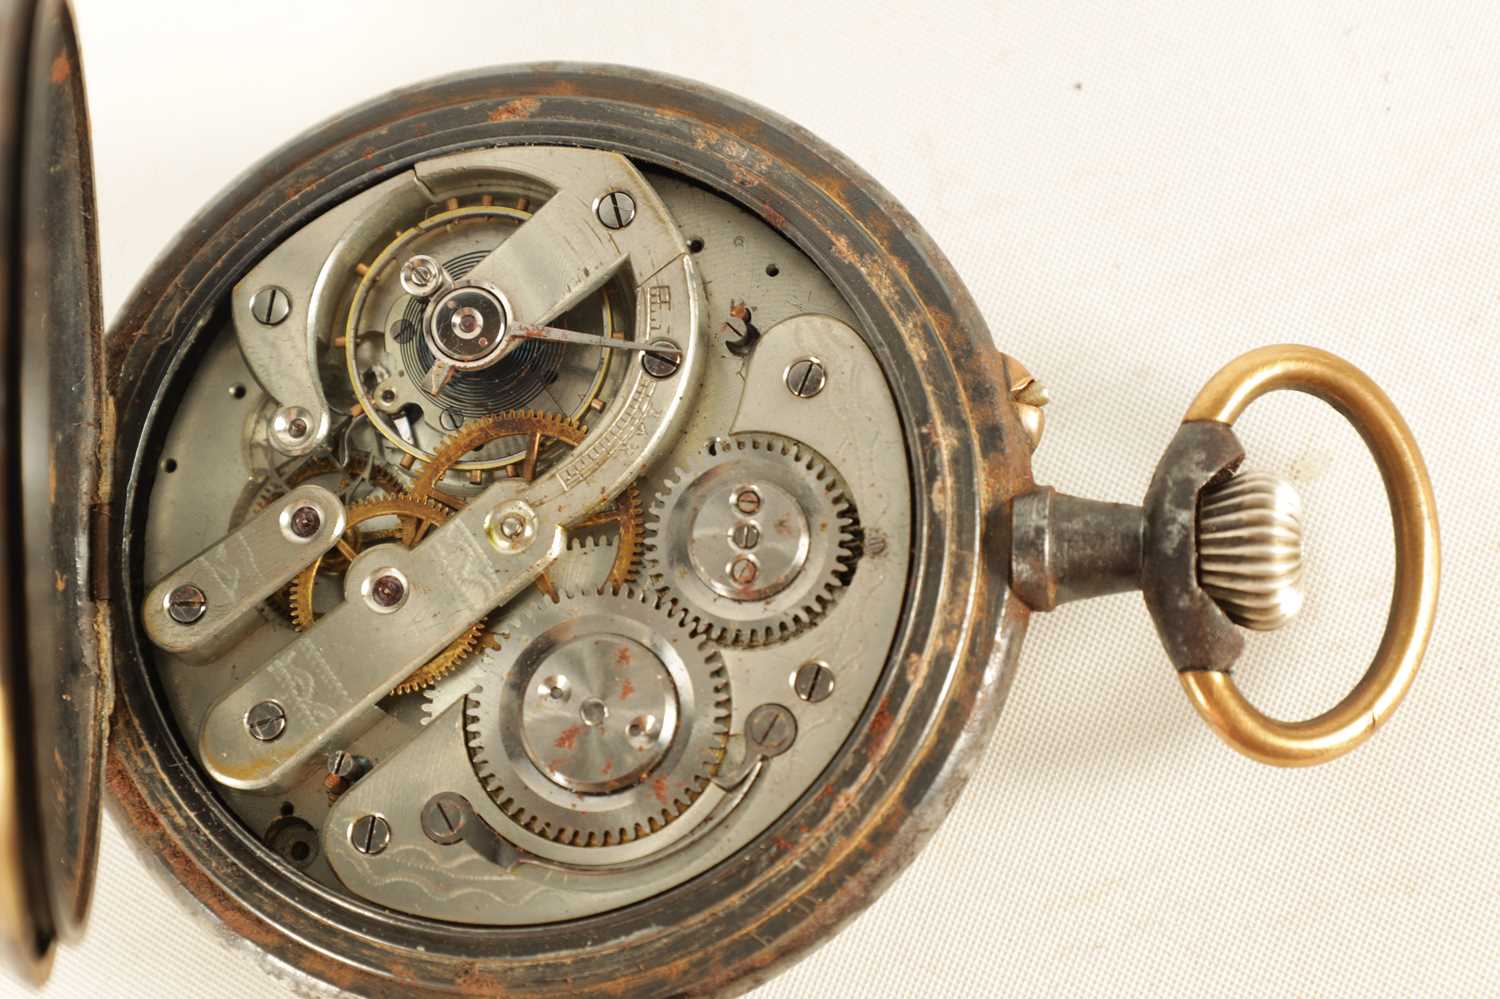 A LARGE EARLY 20TH CENTURY GUN METAL AND GILT DIAL MOON PHASE CALENDAR POCKET WATCH WITH INTERESTING - Image 2 of 4